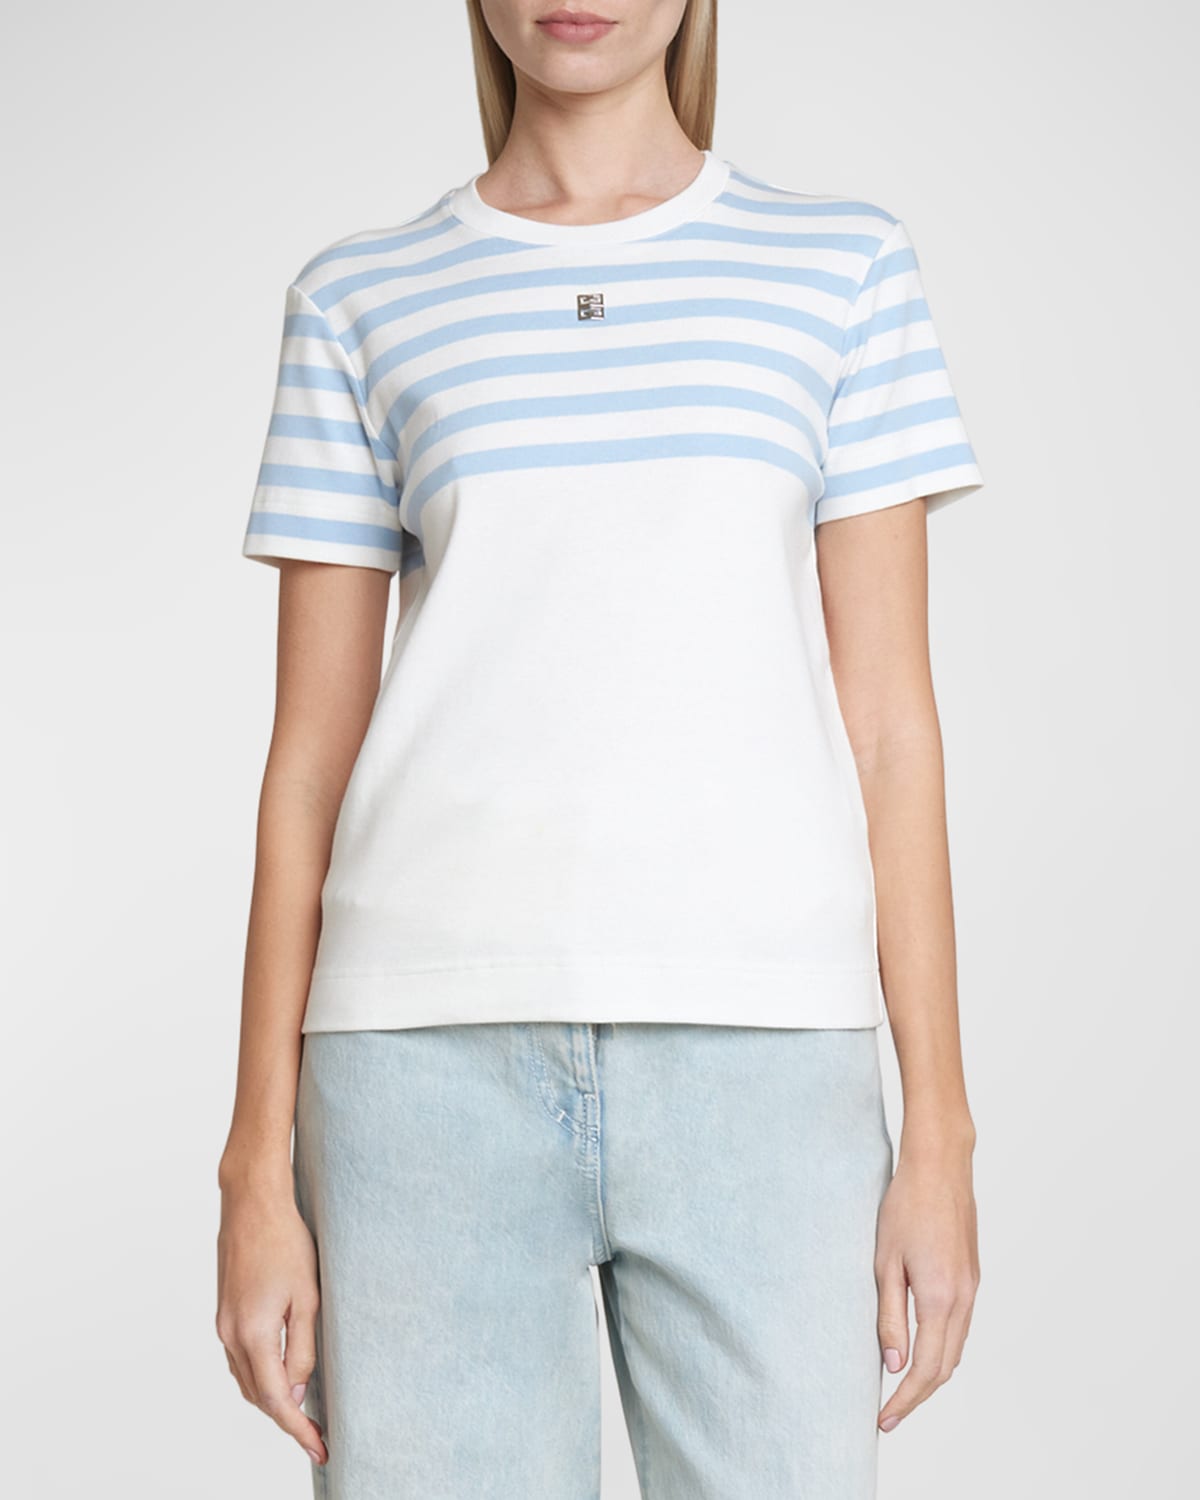 Shop Givenchy Striped Top T-shirt With 4g Logo Detail In White Light Blue